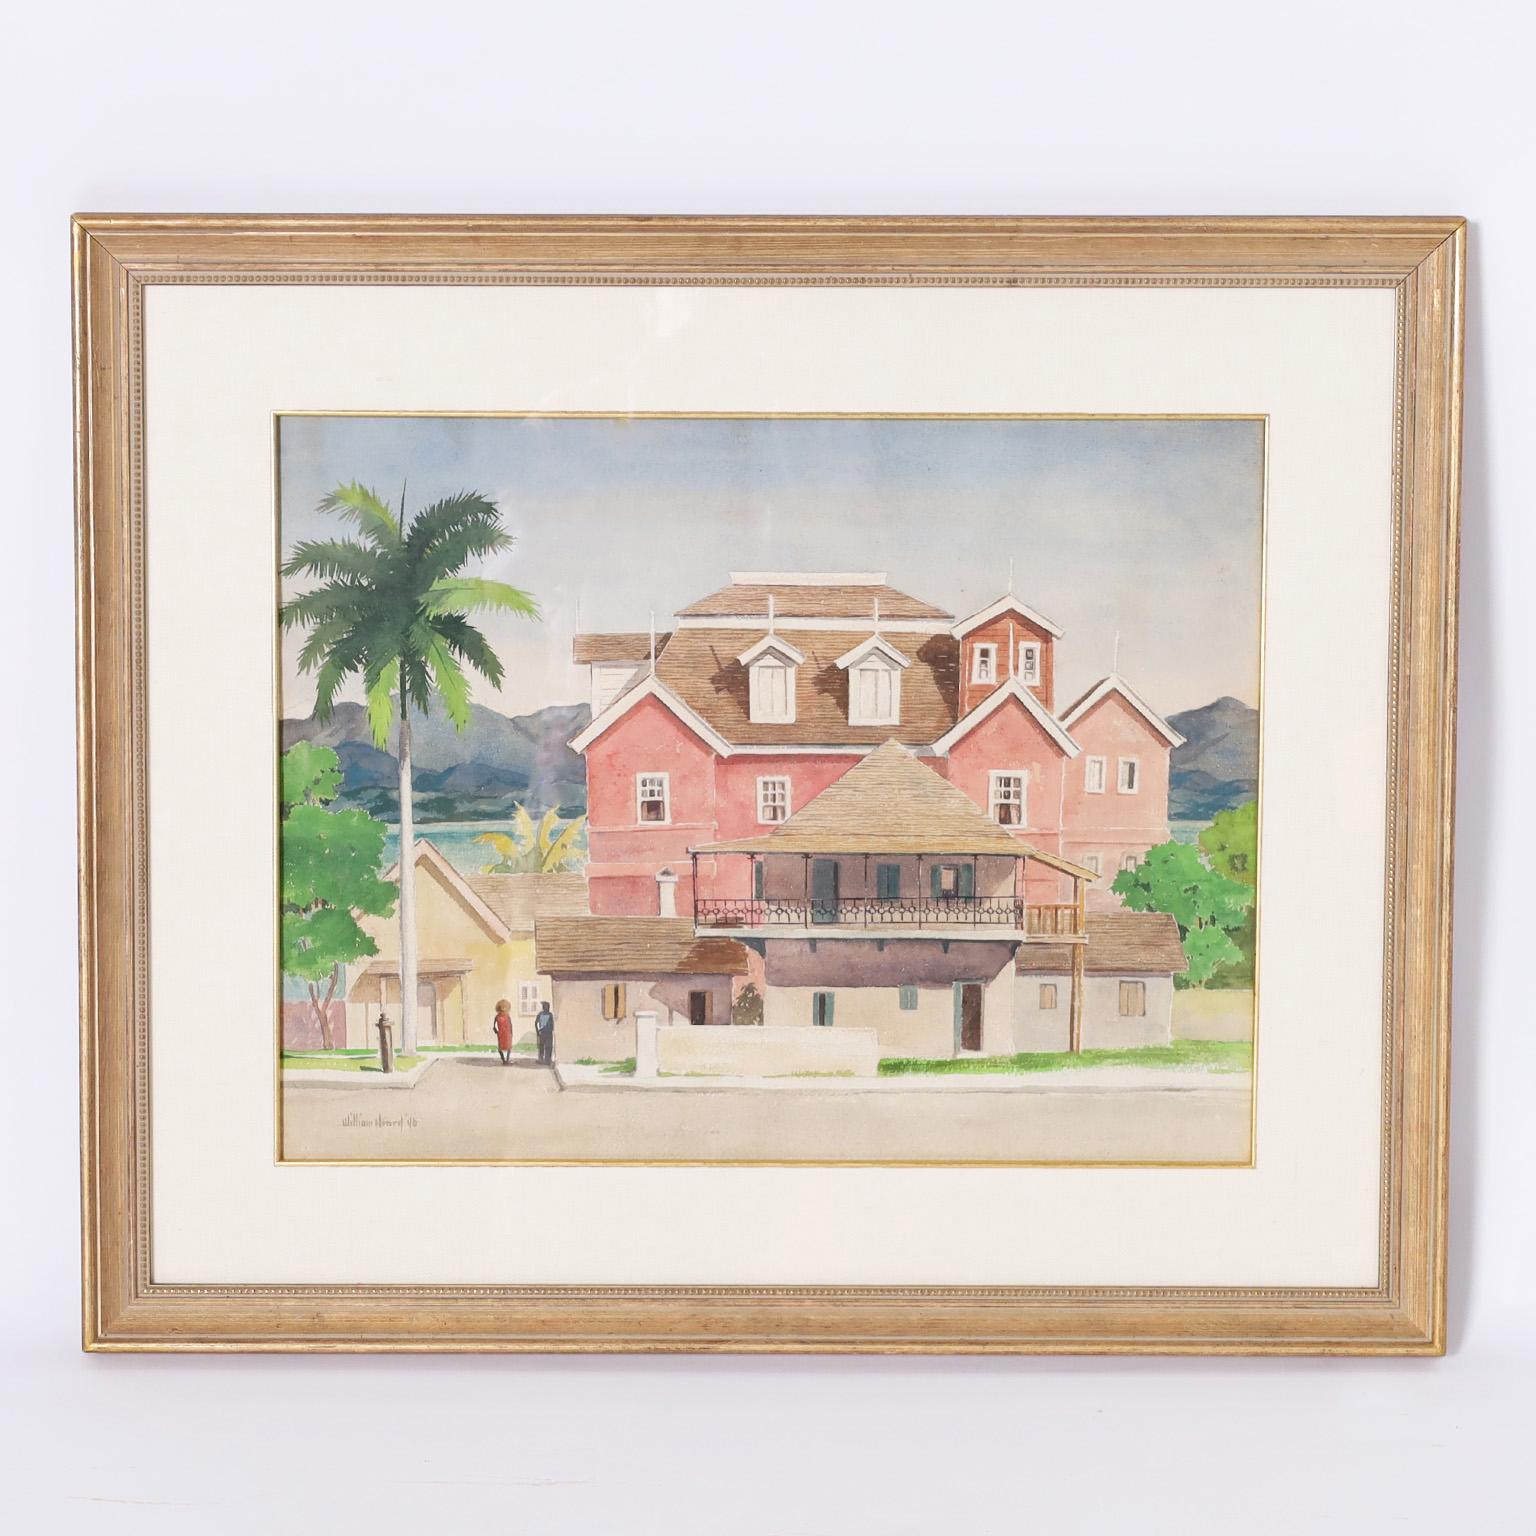 Unknown Landscape Art - Watercolor Painting of Tropical Architecture in the Bahamas